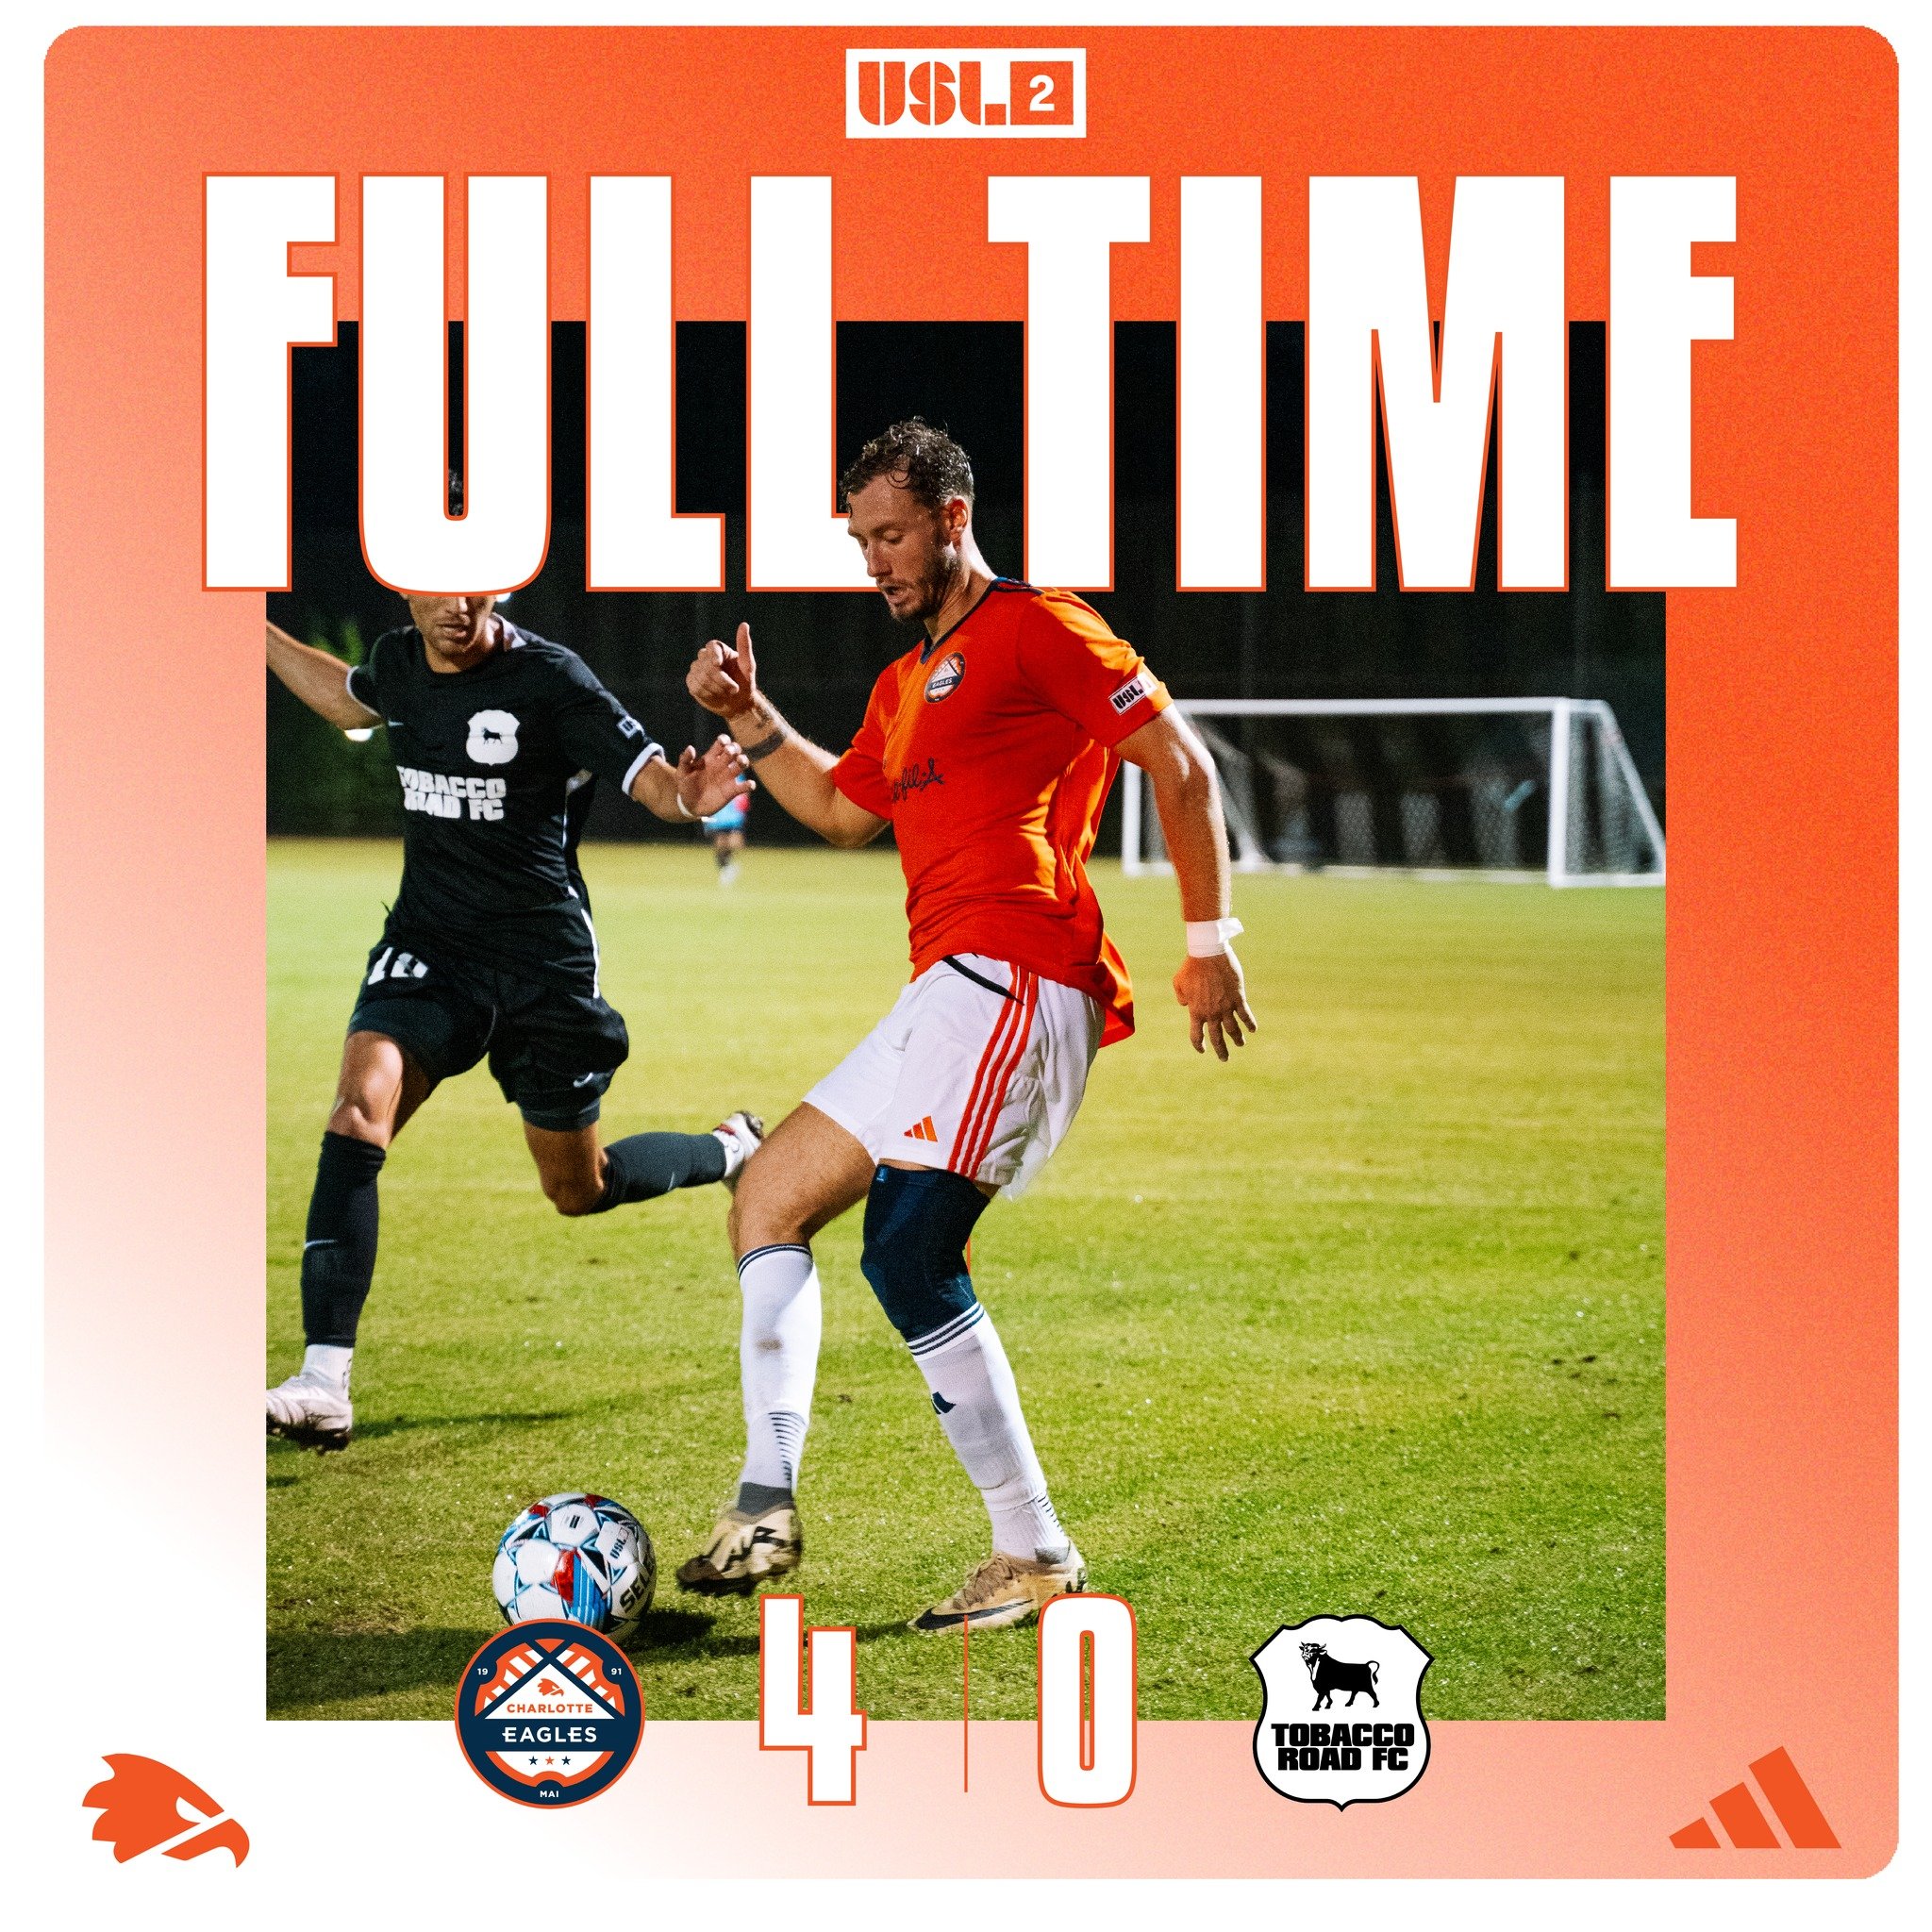 FINAL SCORE 🦅

Great 4-0 win against Tabacco Road at the Eagles first home game of the Season. 

Danjon scored two in the first half and Cerda-Tous scored one in the first and one in the second half. 

Thanks to everyone who came out to cheer on the